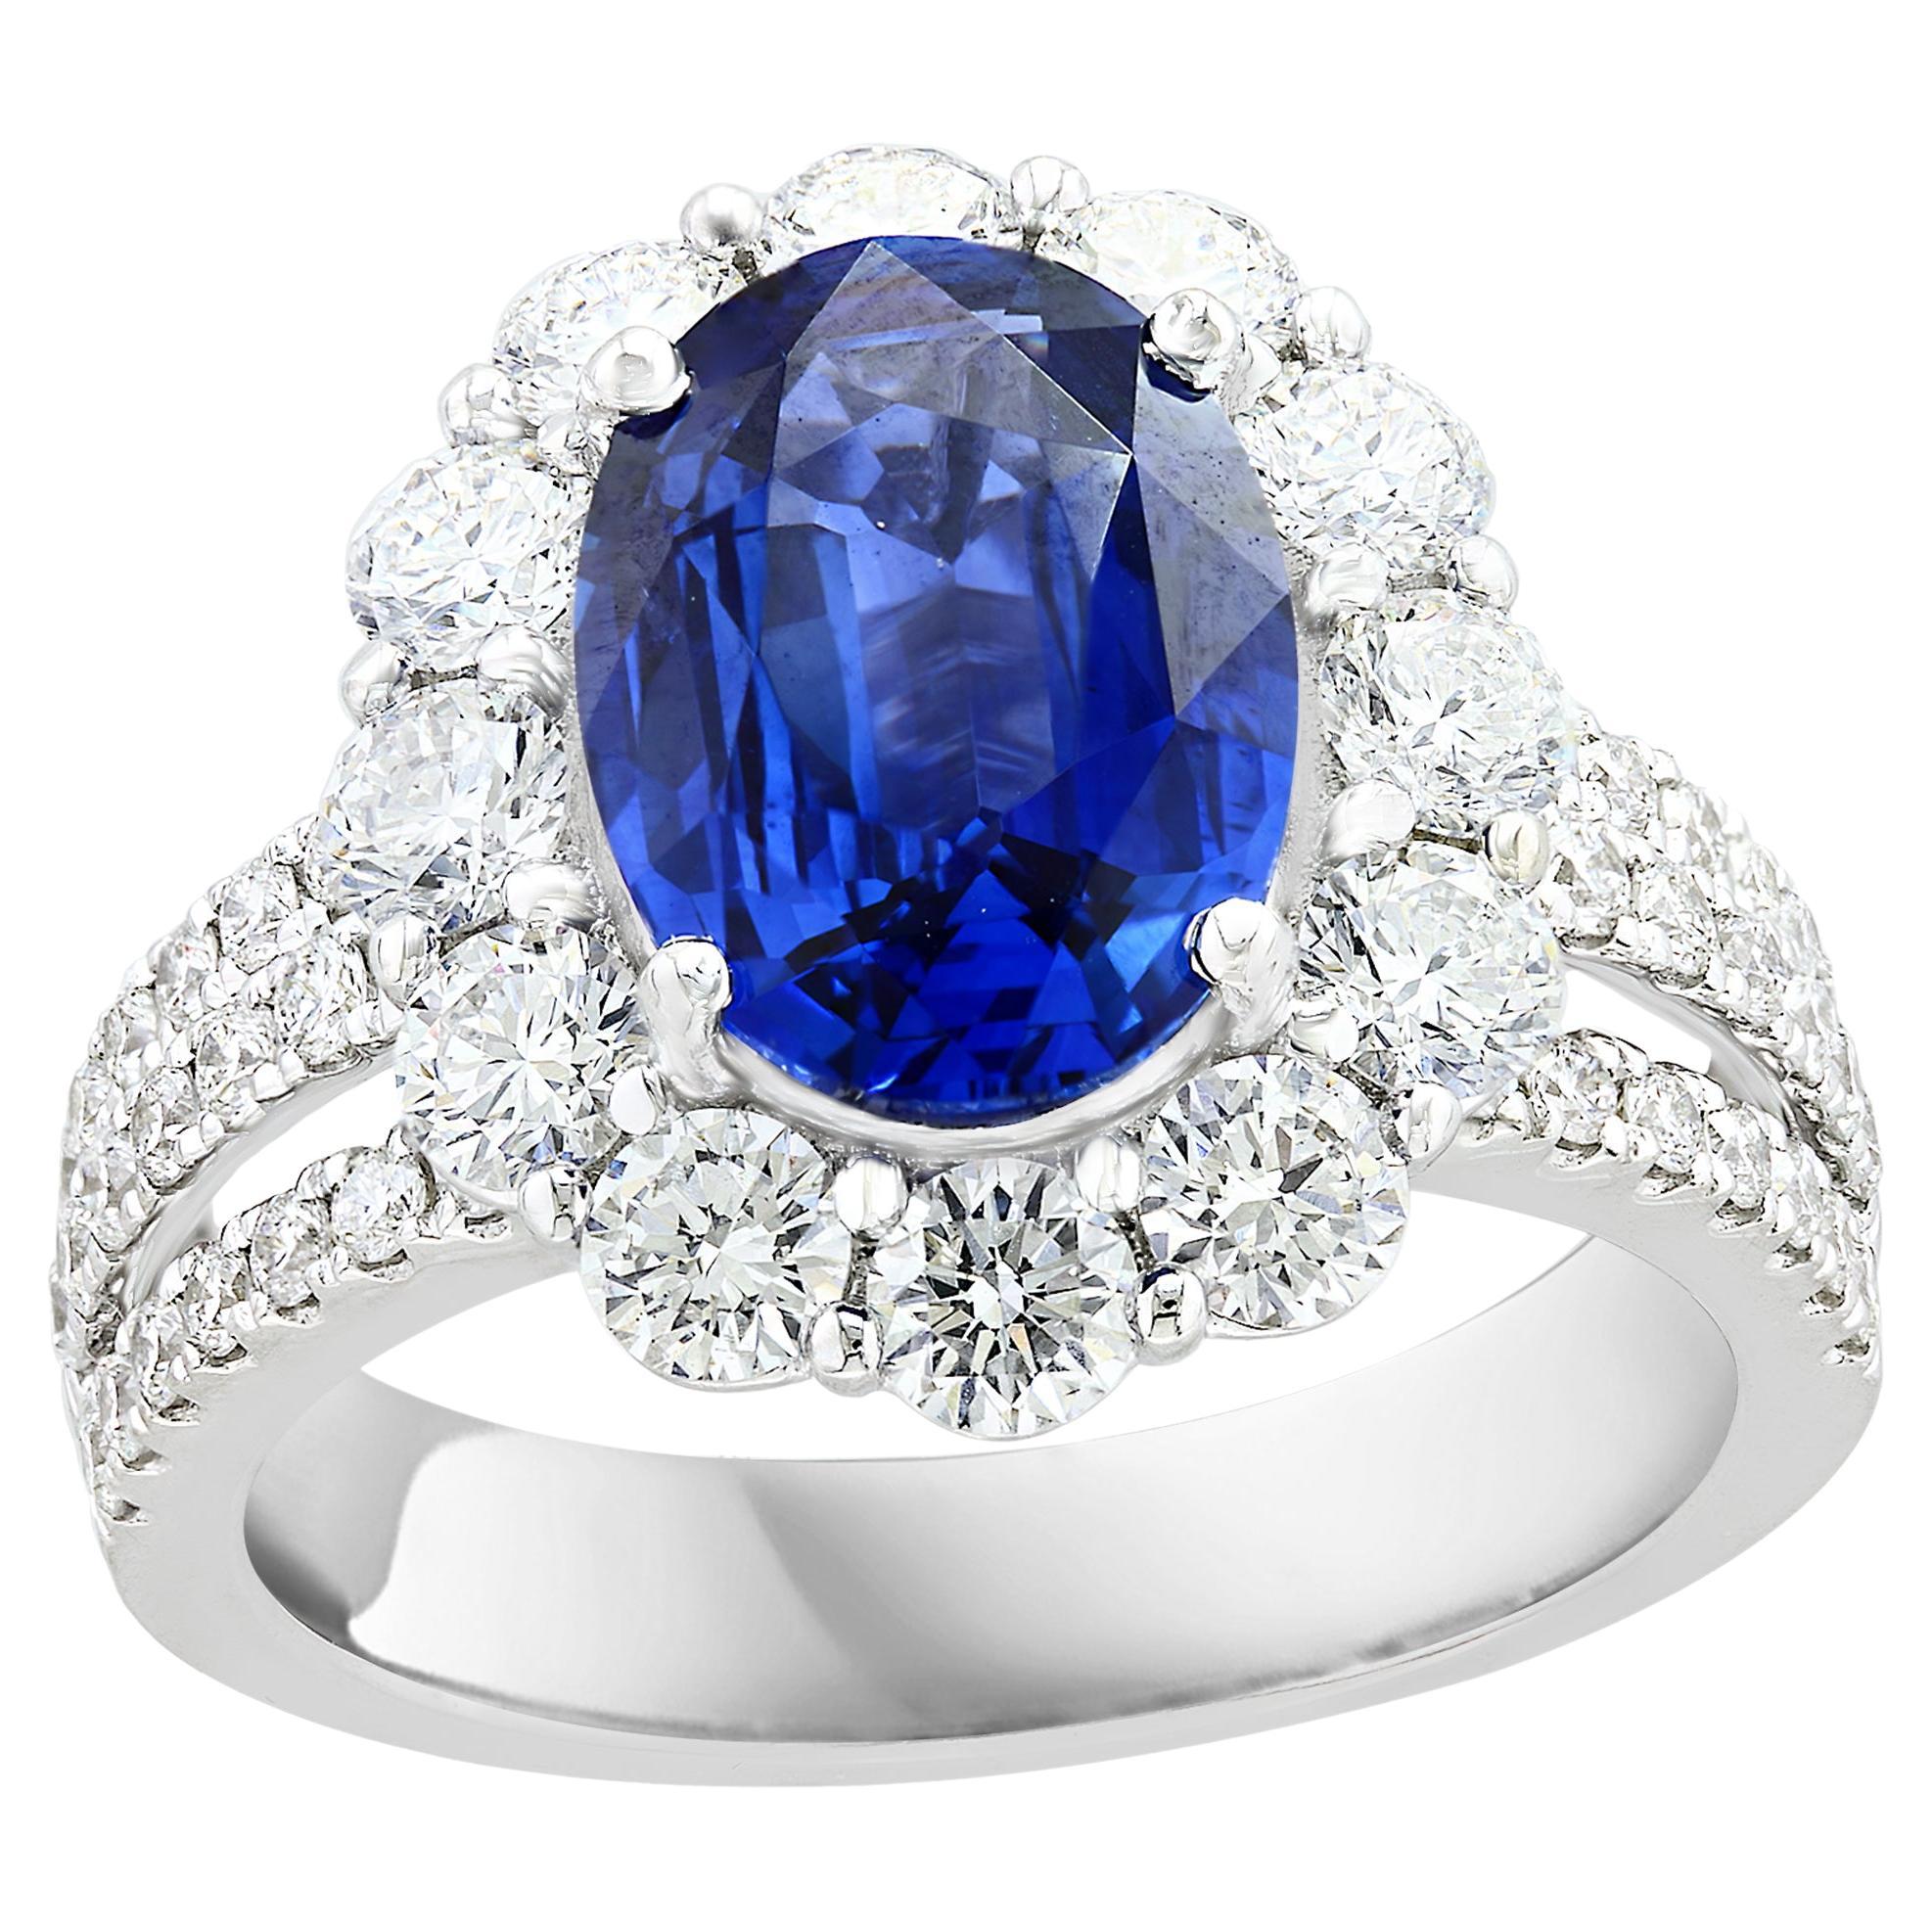 3.09 Carat Oval Shape Blue Sapphire and Diamond Flower Ring in 18K White Gold